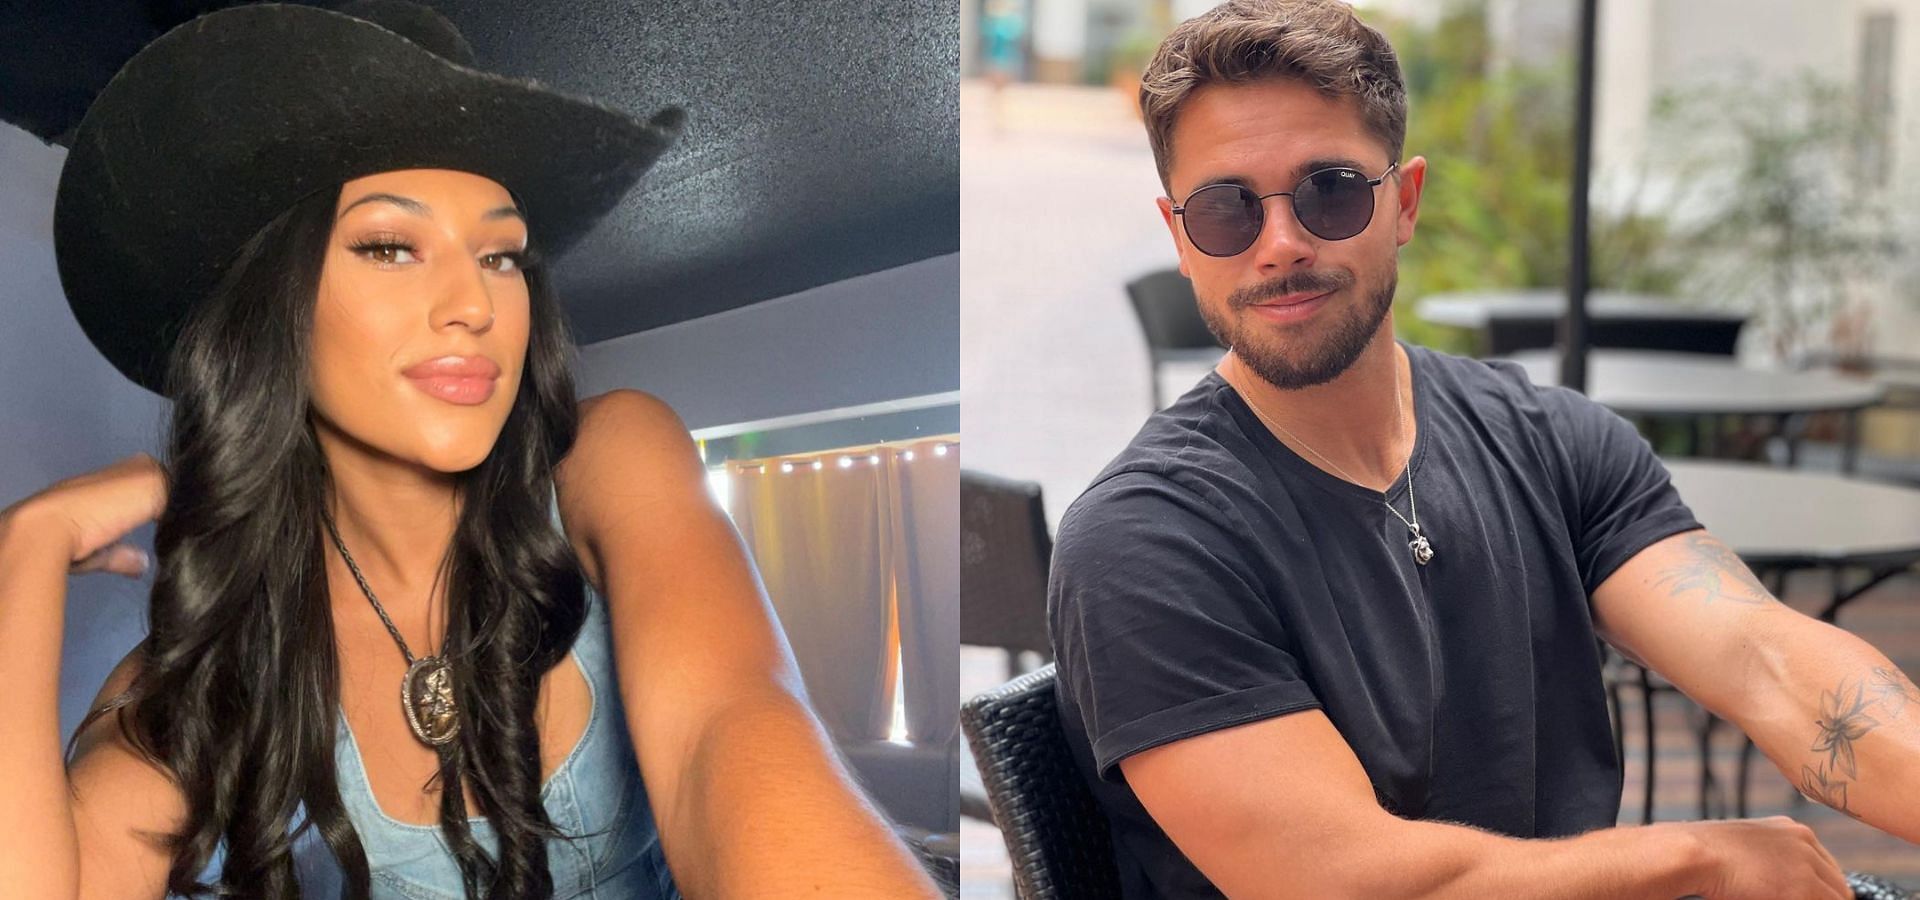 What is the status of Mercedes and Tyler from Bachelor in Paradise